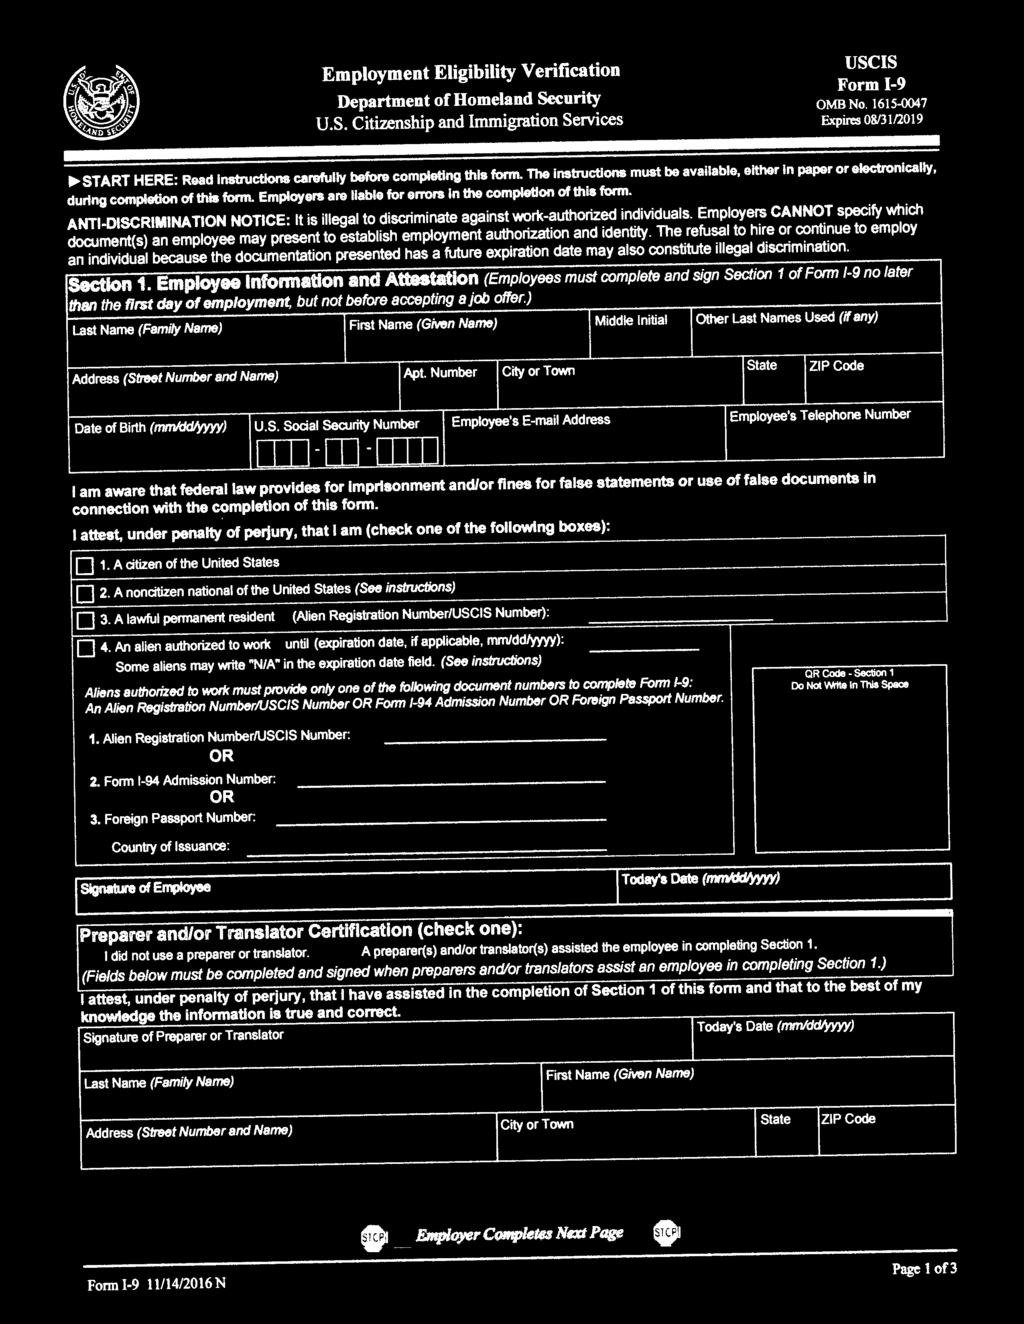 Employers are liable for errors in the completion of this form. ANTI-DISCRIMINATION NOTICE: It is illegal to discriminate against work-authorized individuals.